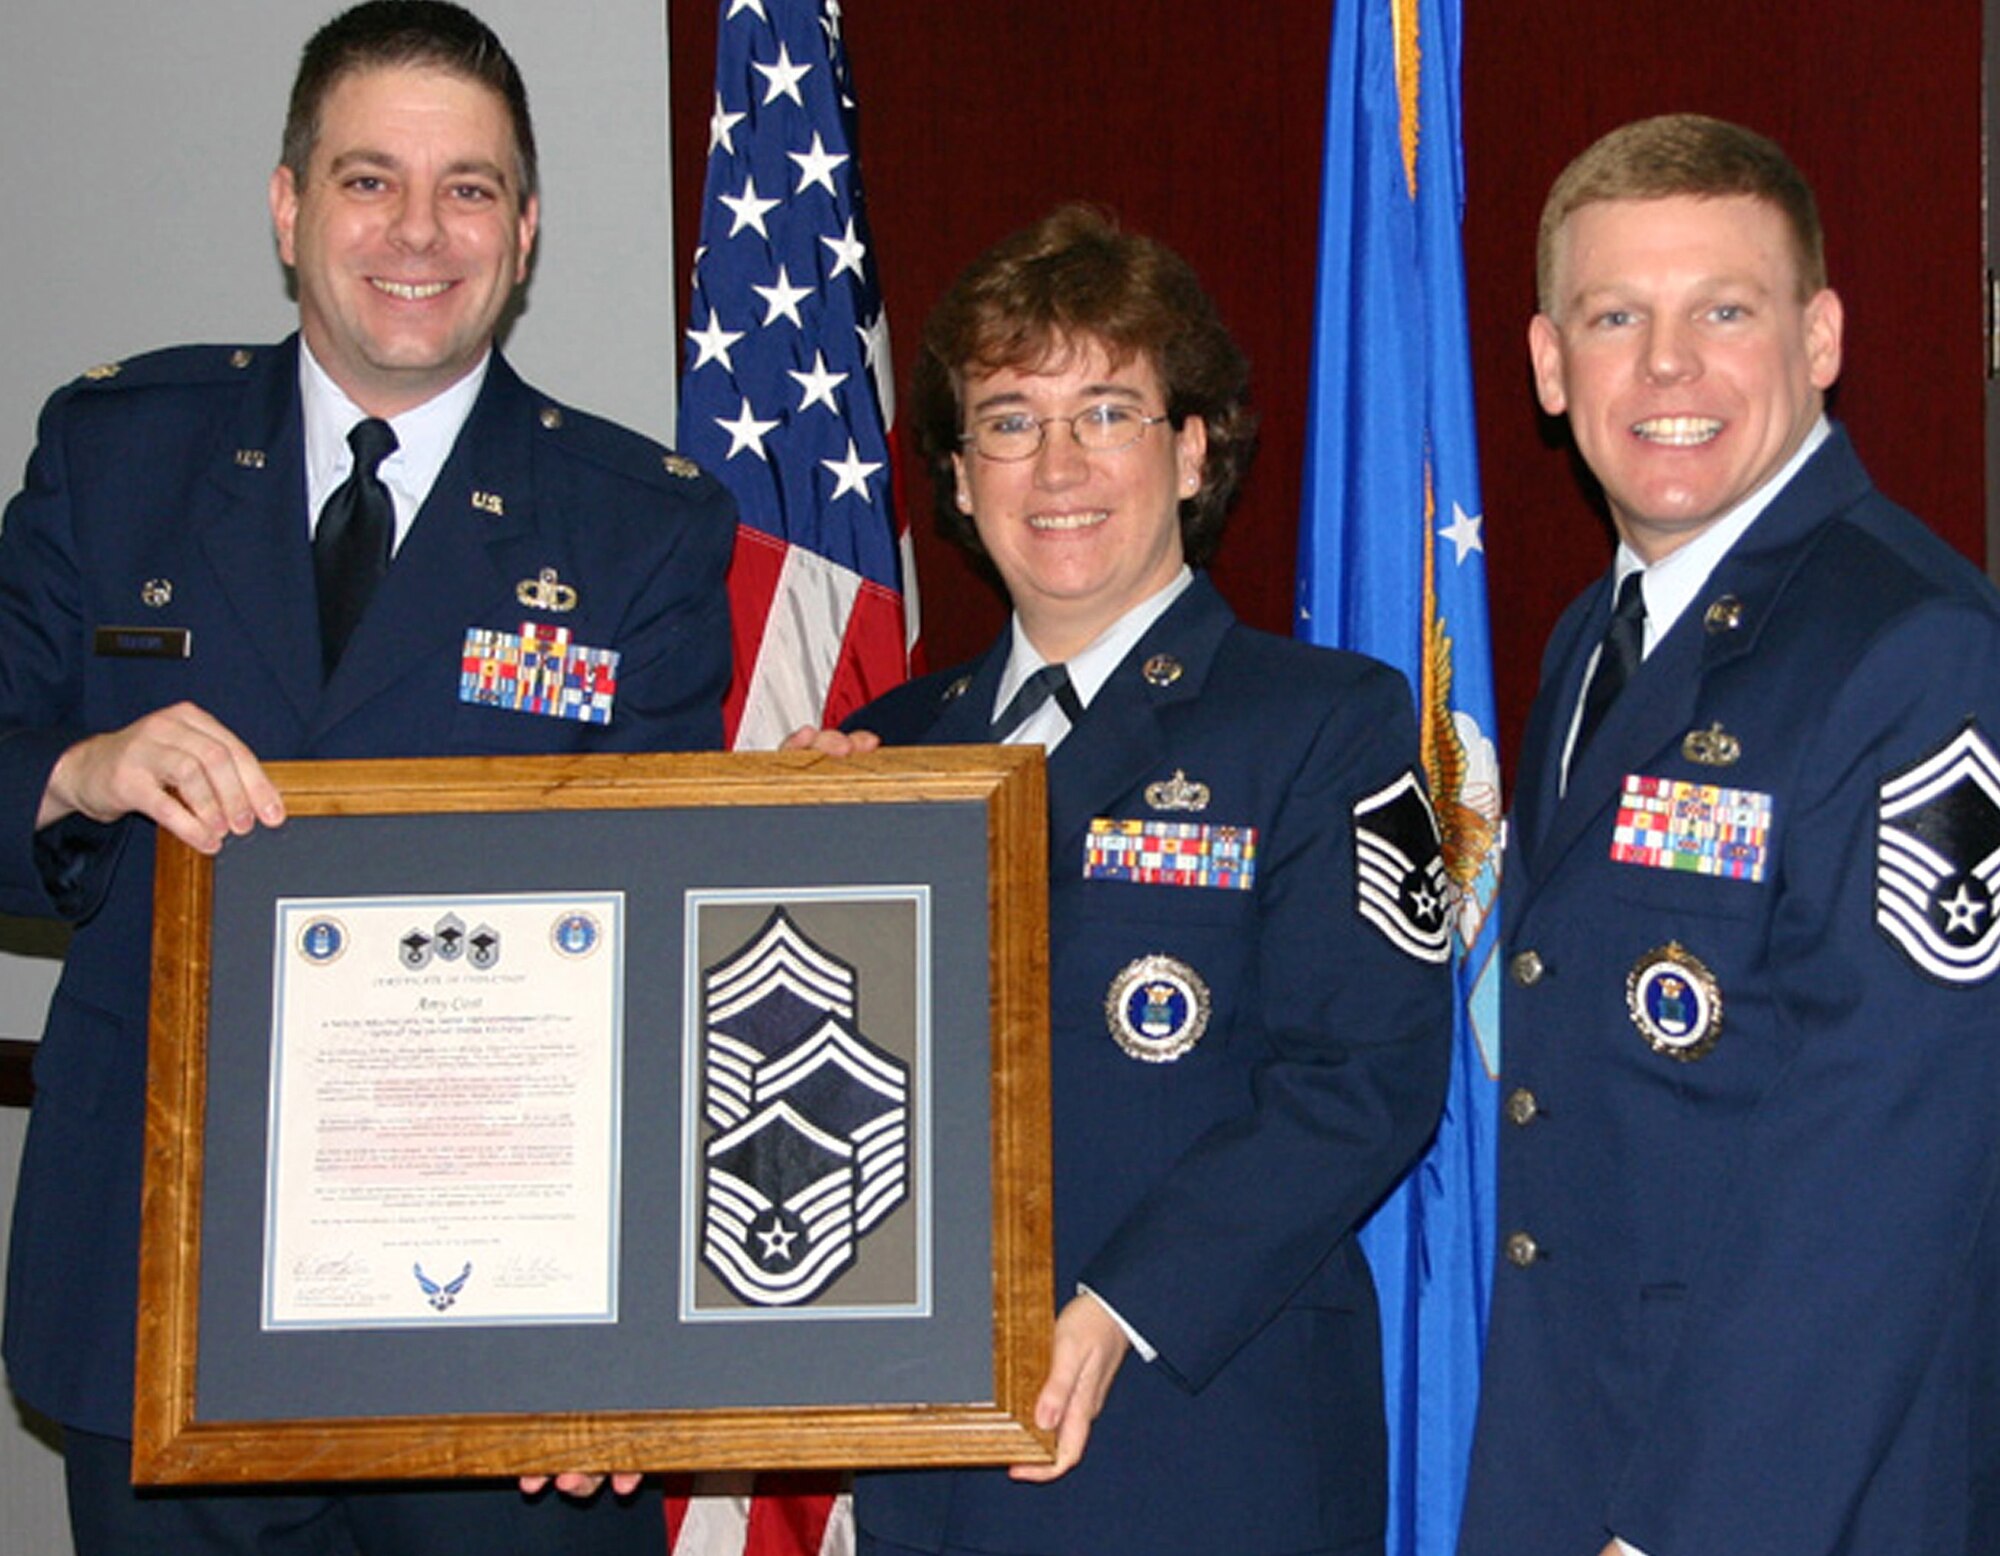 Master Sgt. Amy Cost, 330th Recruiting Squadron marketing representative, accepts a gift welcoming her into the Air Force Top Three following her promotion to E-7 under the Stripes for Exceptional Performers program. Presenting the award are Lt. Col. Robert W. Trayers Jr., left, 330th RCS commander, and Senior Master Sgt. Charles E. Lamer Jr., squadron production superintendent and Sergeant Cost’s supervisor. The STEP program is reserved for staff to master sergeants who have performed exceptionally well during their careers and are selected for promotion by their commander. (Courtesy photo by Terry Meyer)